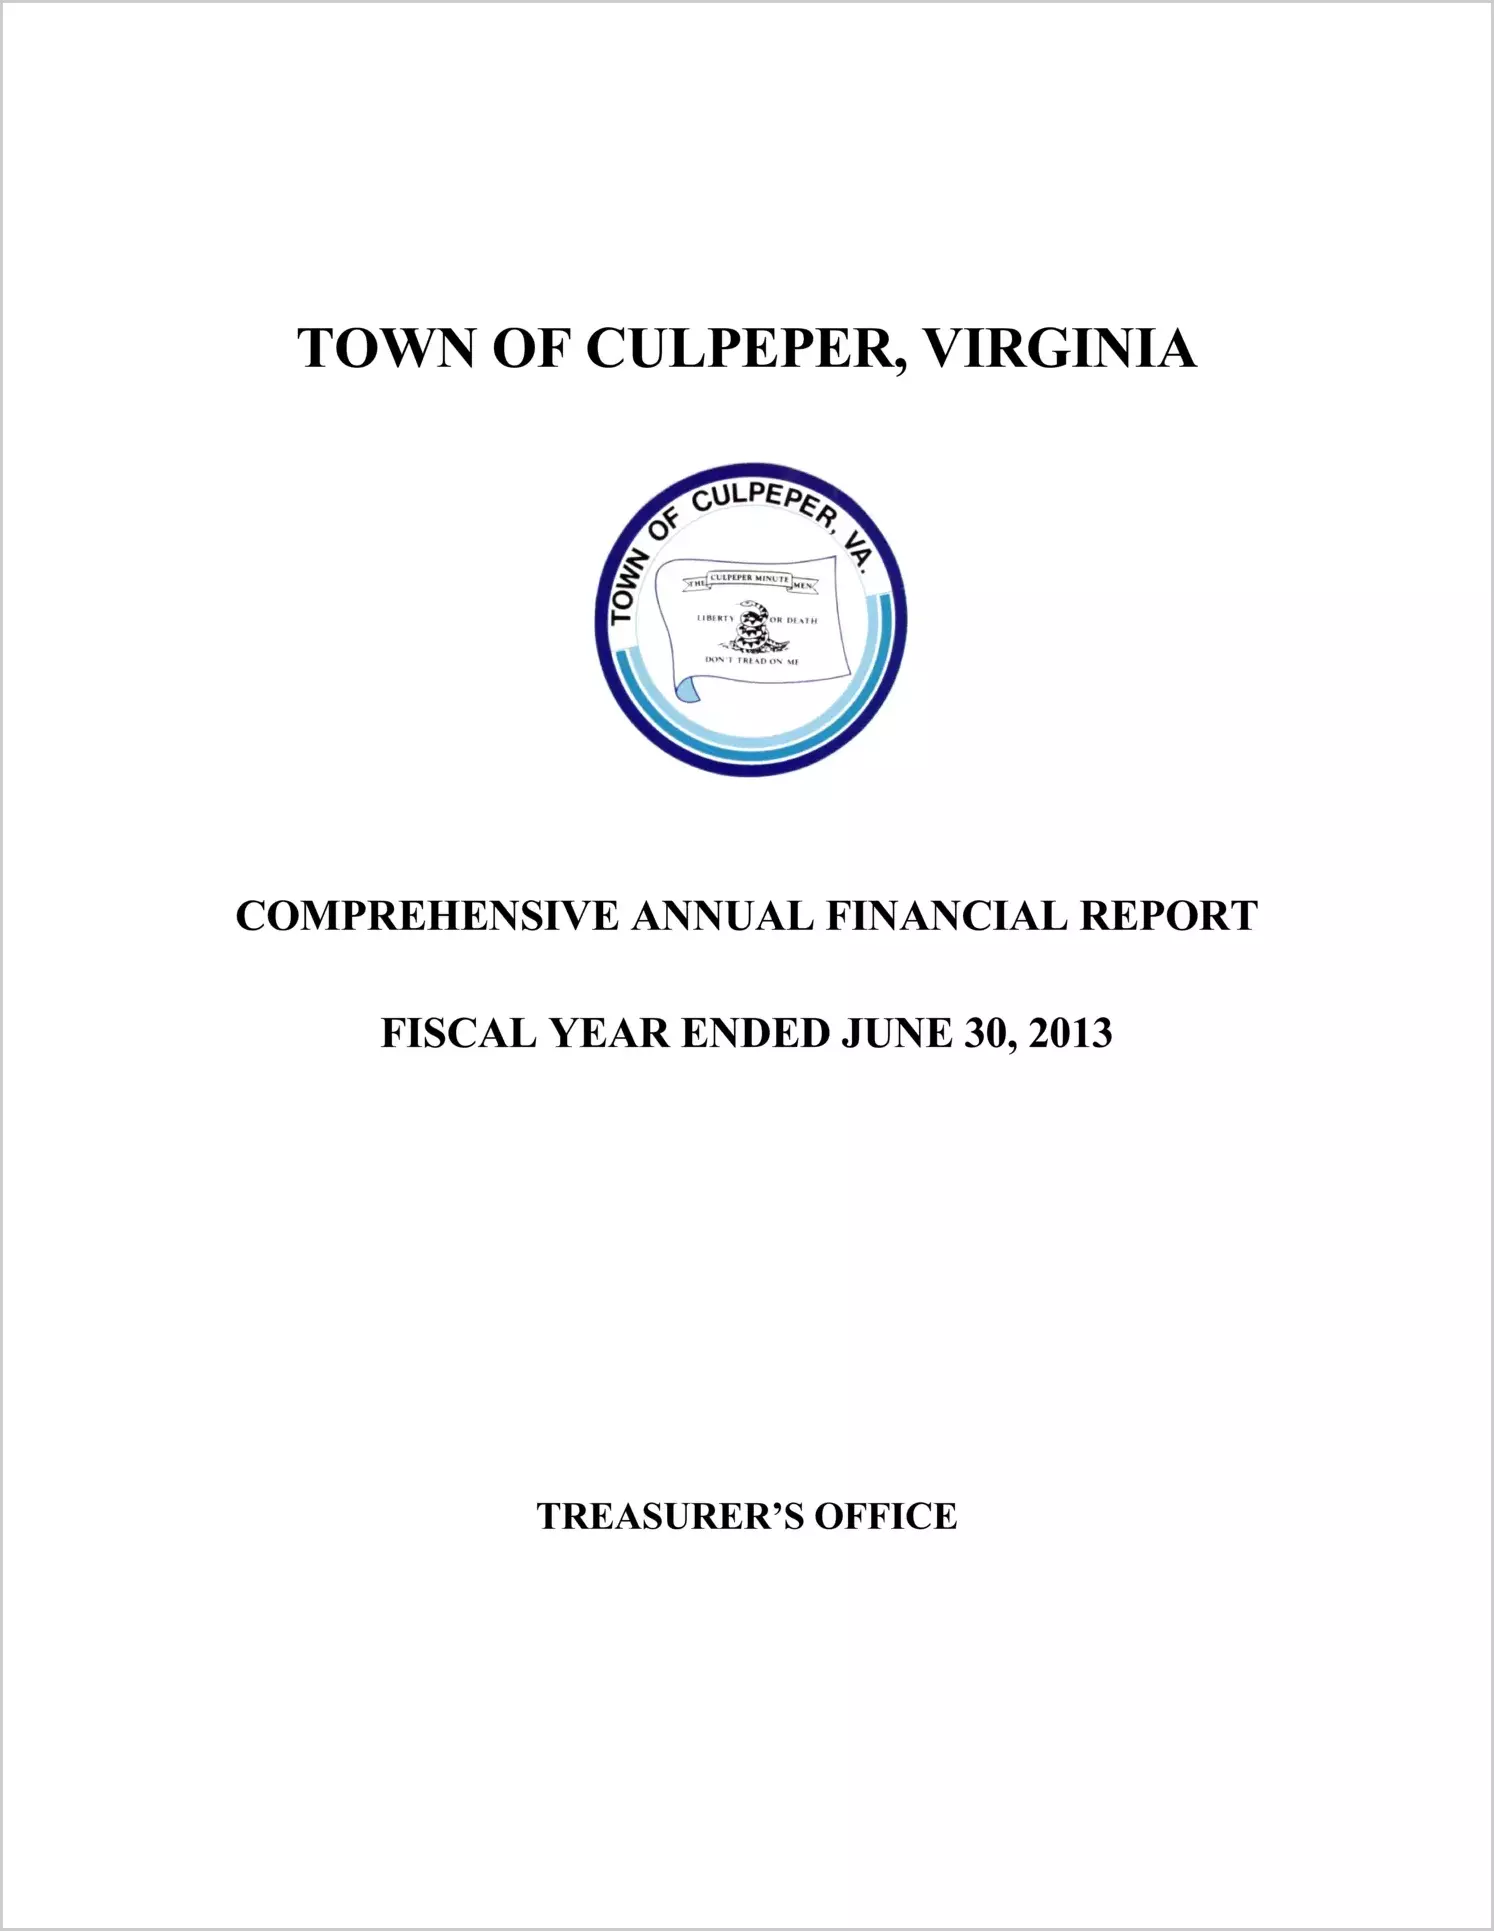 2013 Annual Financial Report for Town of Culpeper